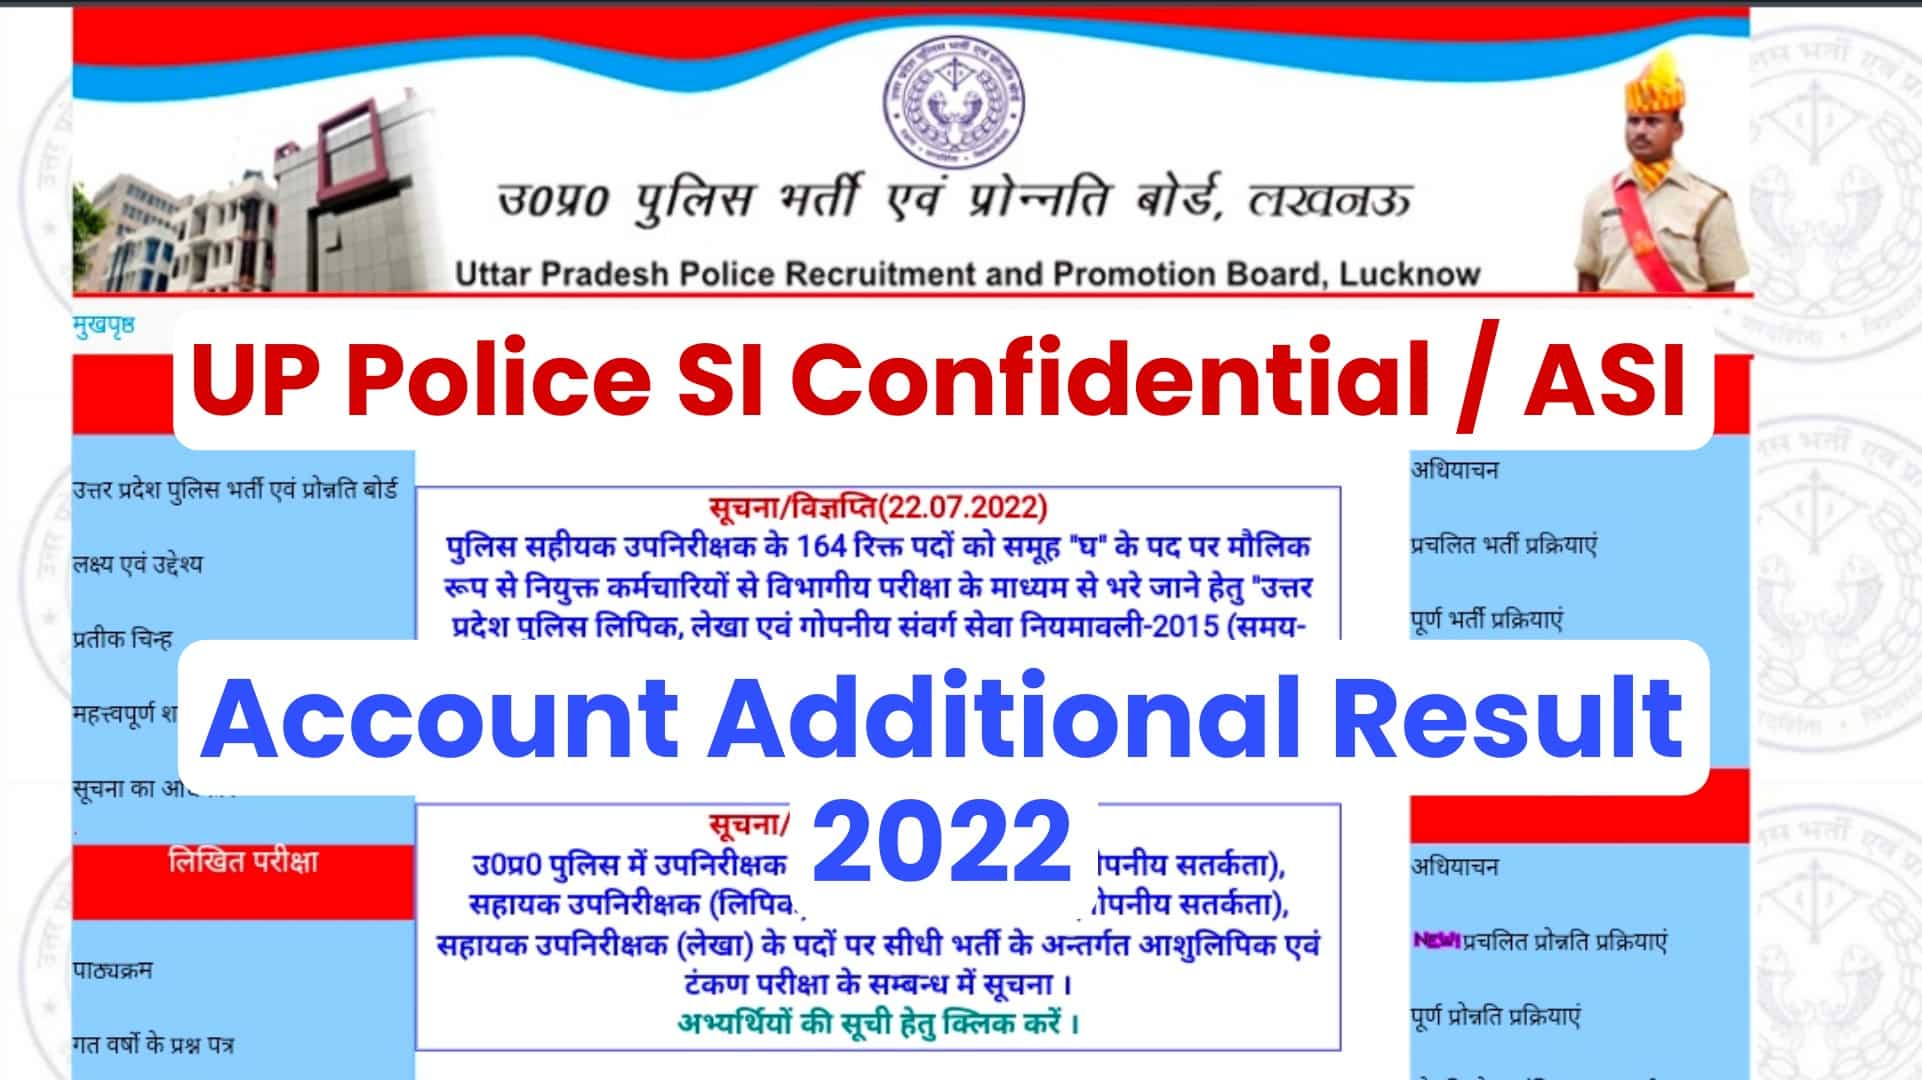 UP Police ASI Account Additional List 2022